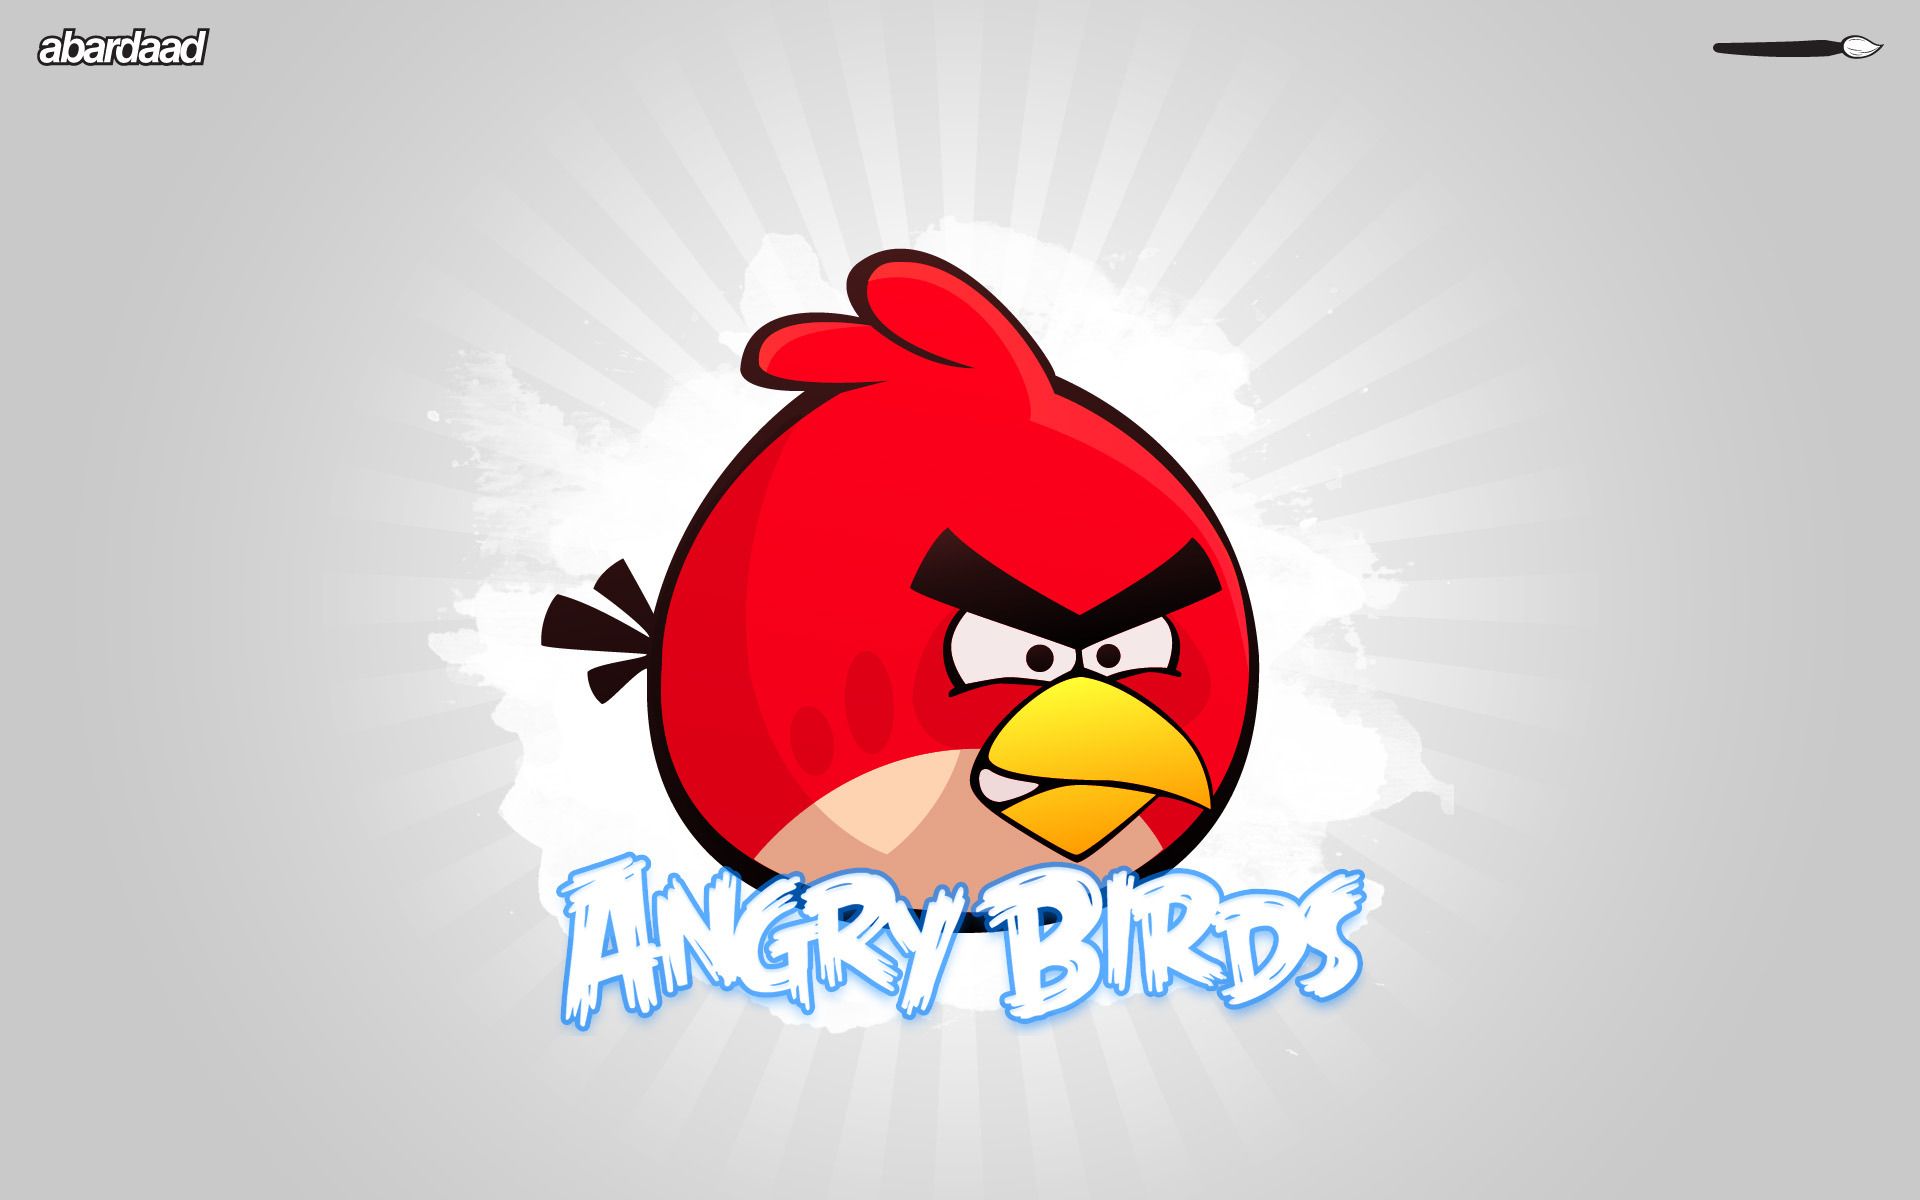 Red Angry Birds Full HD Wallpaper Image for Mac